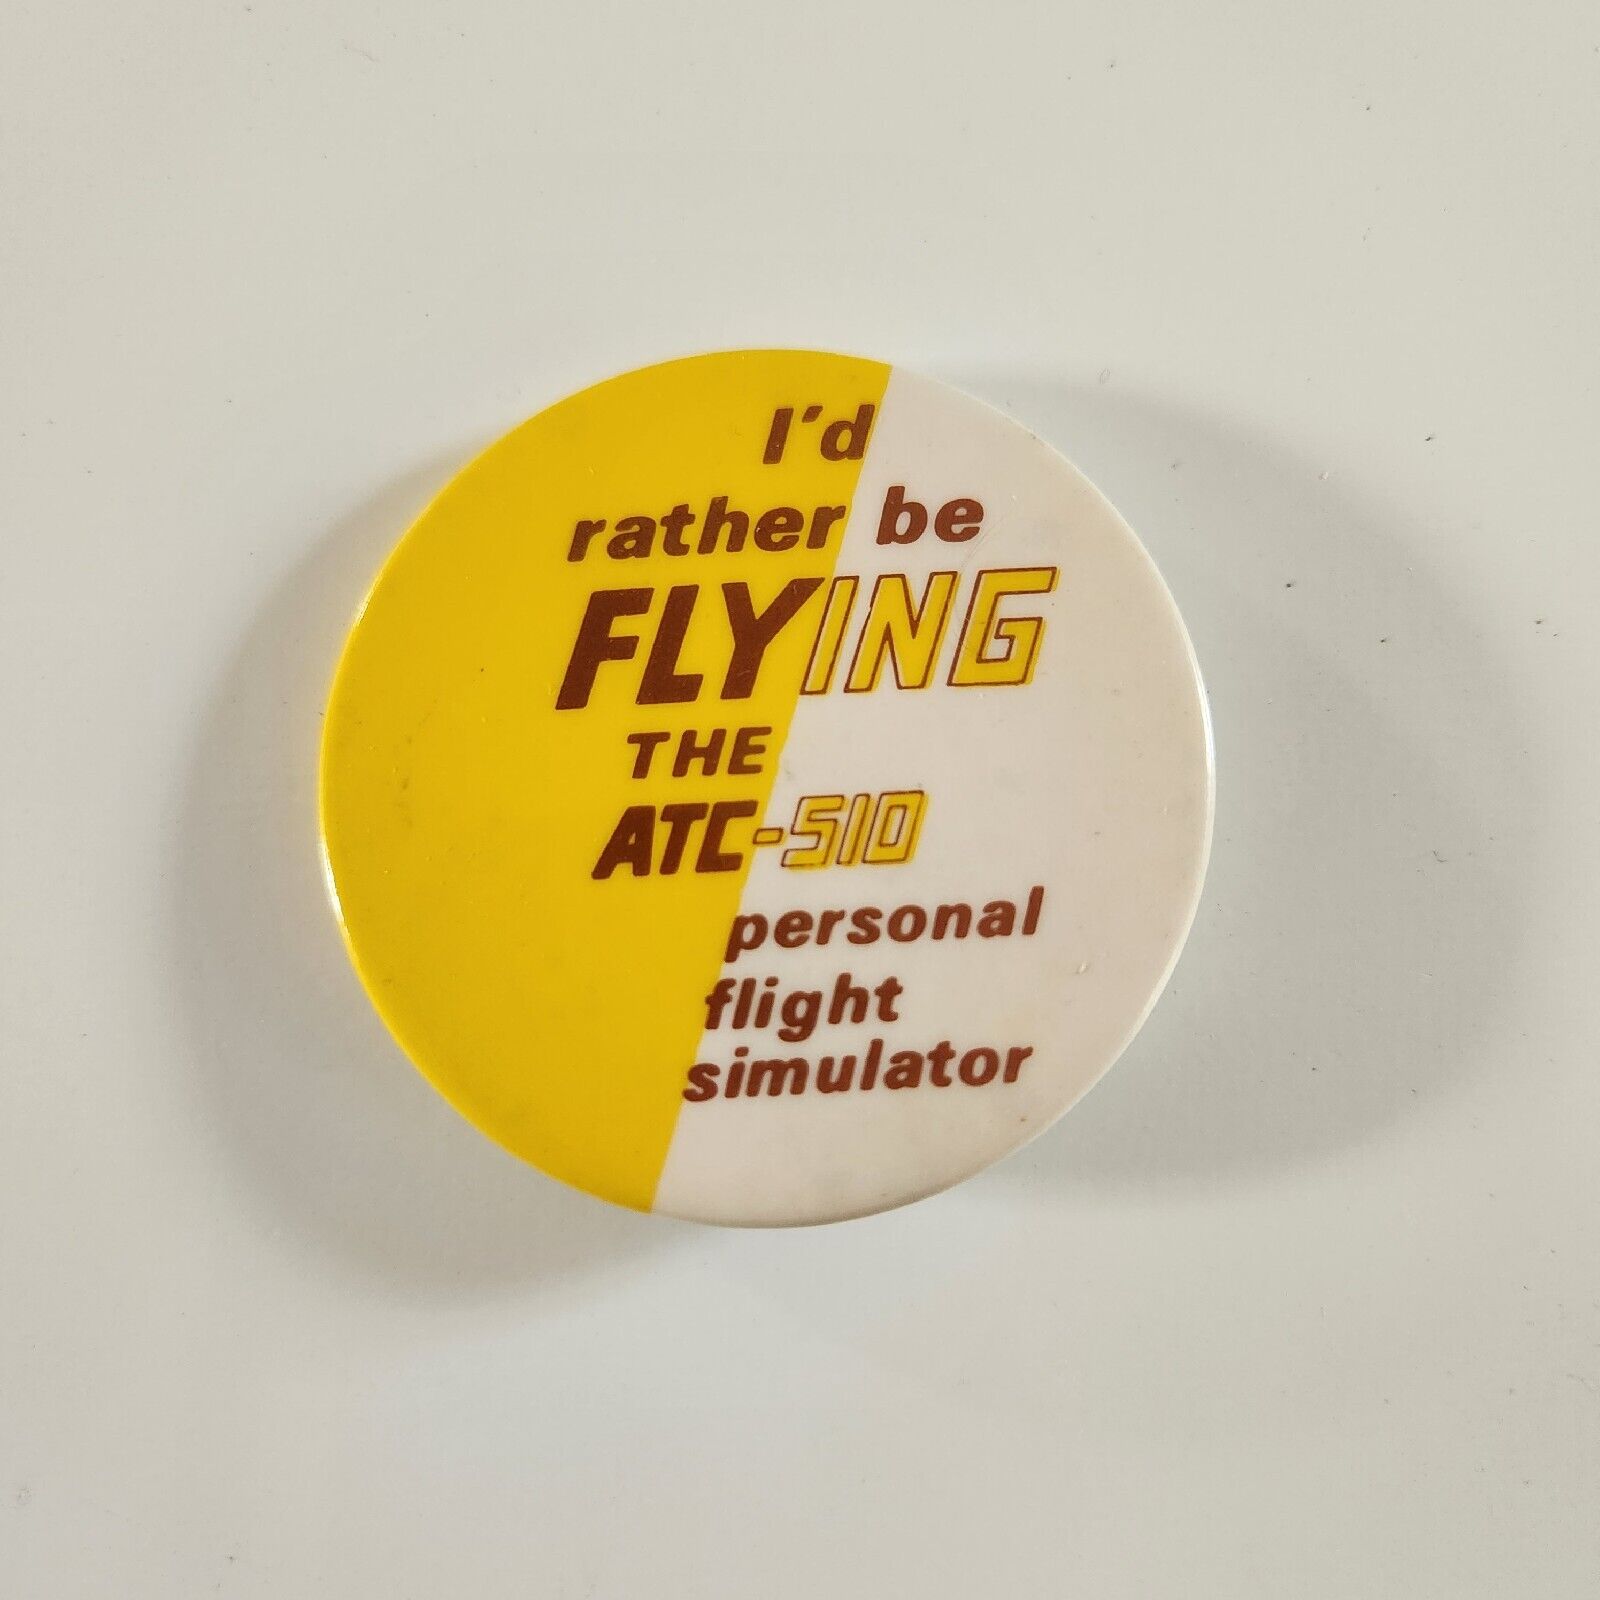 Vintage Button Pin Id Rather Be Flying Atc-510 Personal Flight Simulator RARE